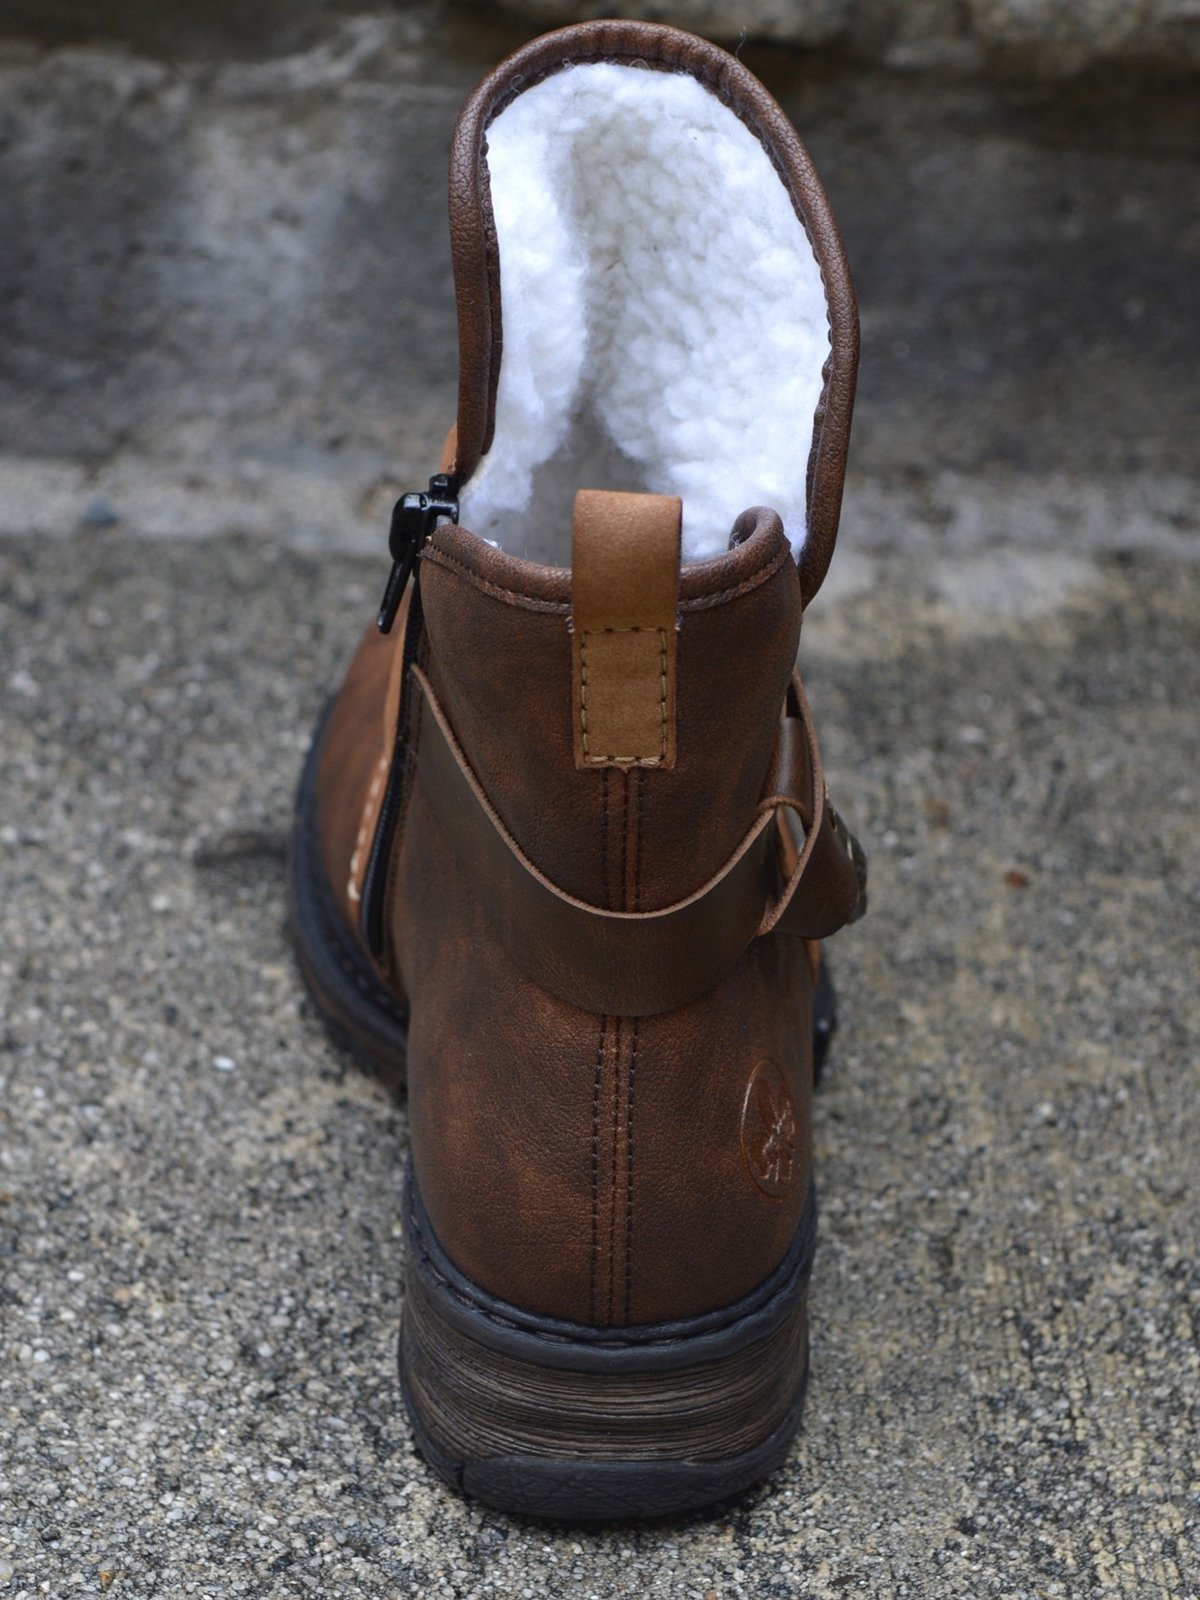 Brown Pu Leather Non-Slip Low Heel Warmth Zipper Boots